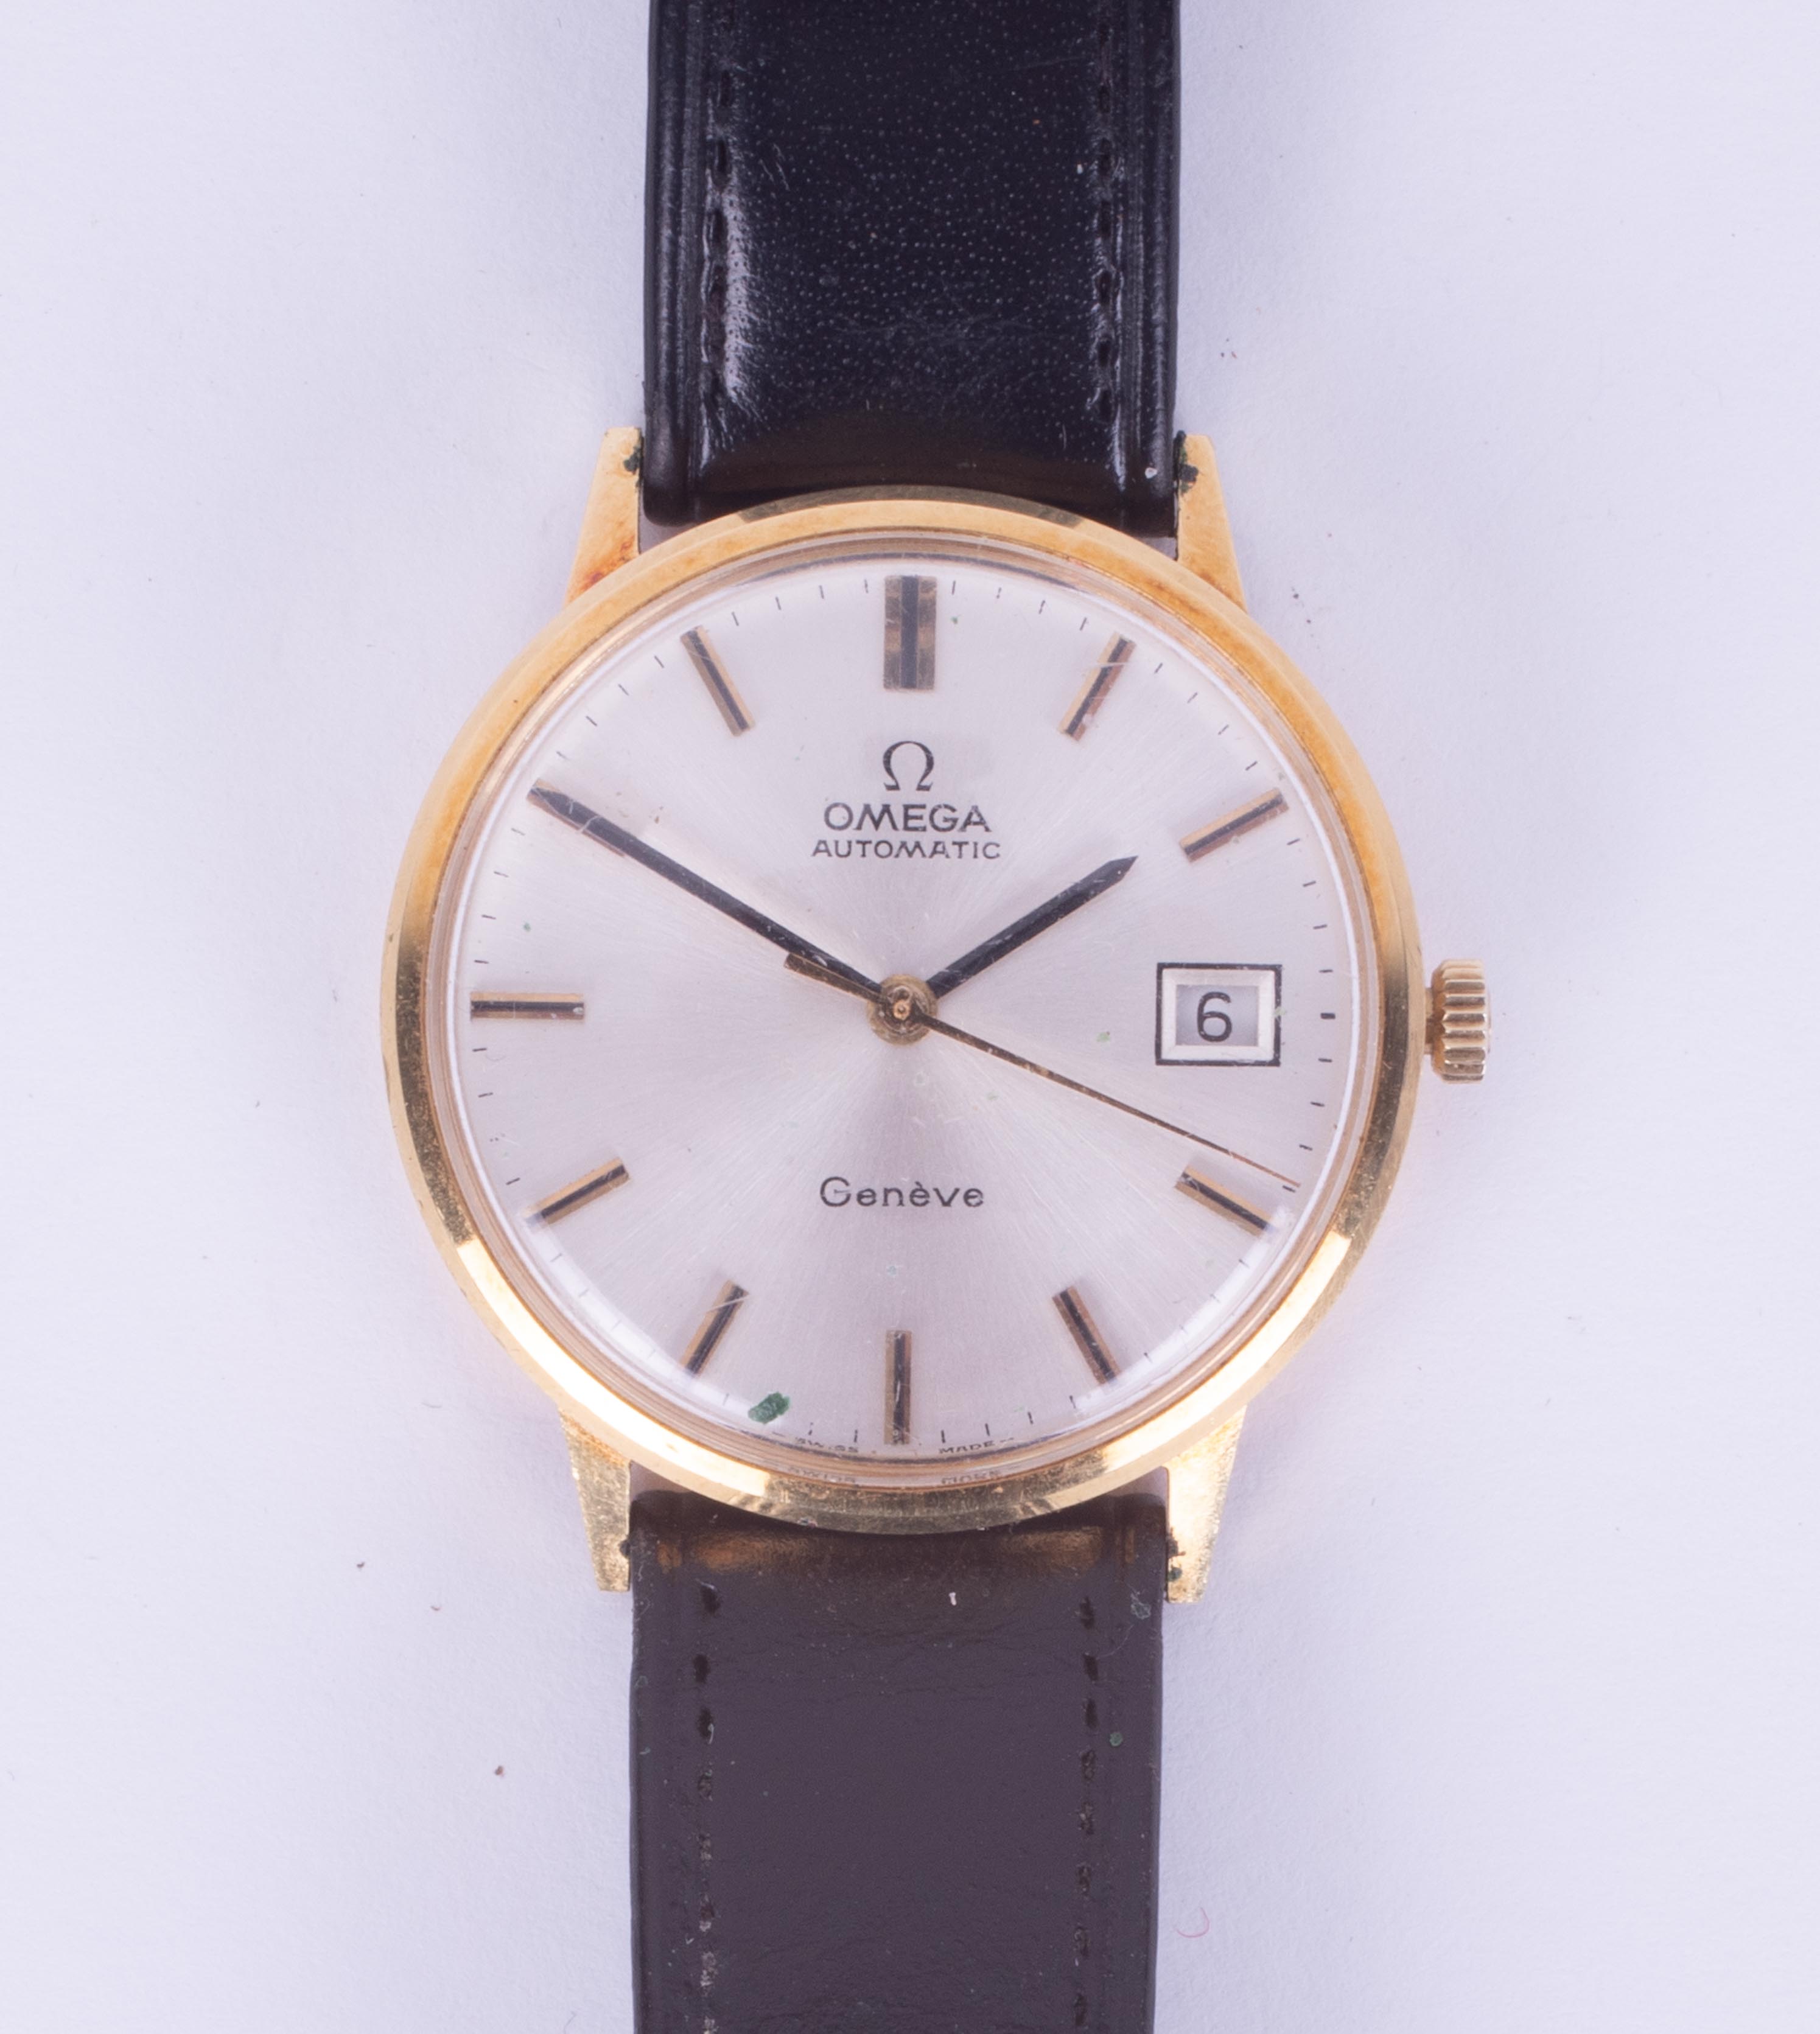 Omega, a vintage 18ct gold gent's automatic wristwatch, the dial marked Geneva, the backplate with